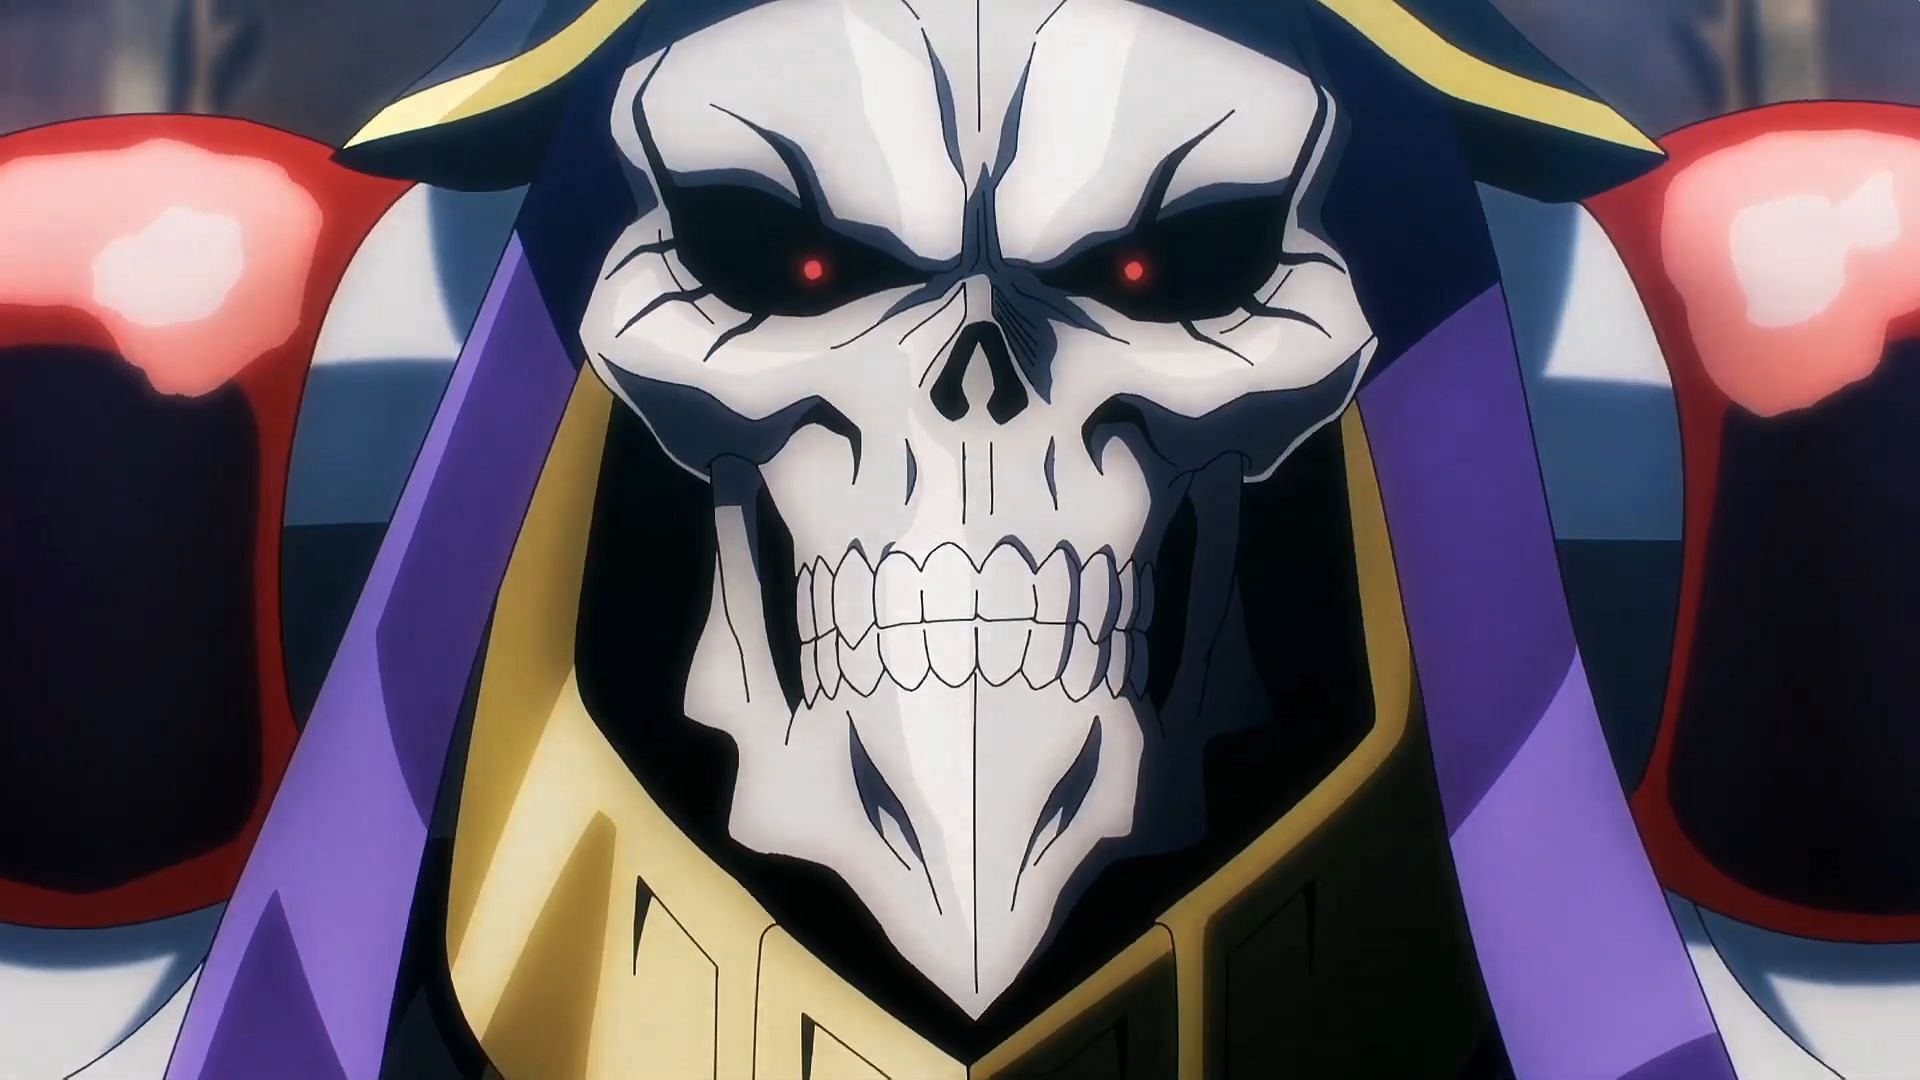 Ainz is undefeated, just like Saitama in One Punch Man (Image via Studio Madhouse)